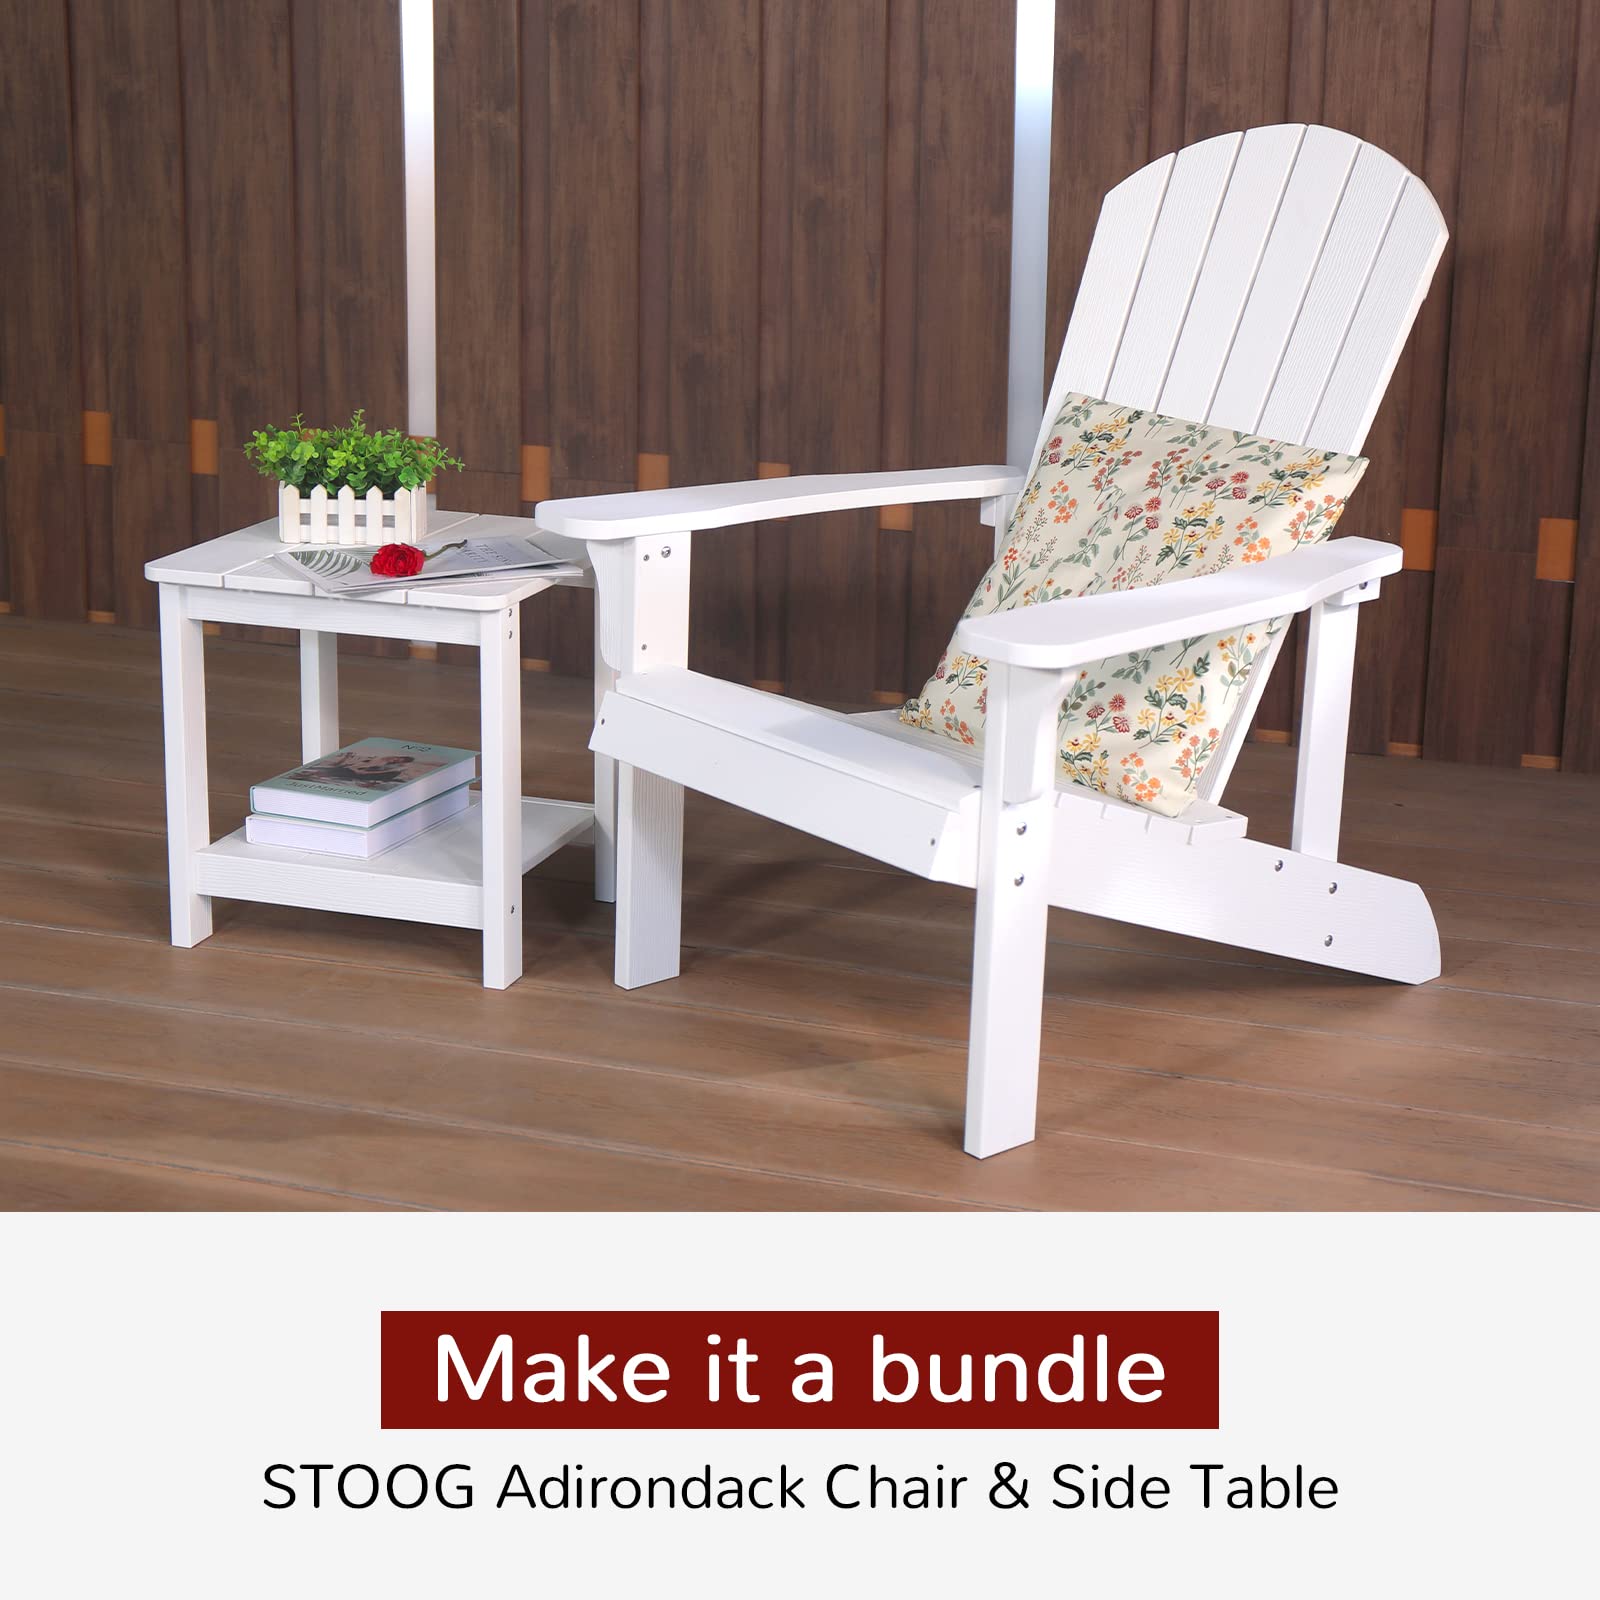 Outdoor Side Table, Weather Resistant 2-Tier Side Table, Hips Plastic End Table, Adirondack Side Table, Rocker Side Table for Backyard, Patio, Pool, Deck and Garden, White, 17 x 17x 17.5 inches - image 2 of 7